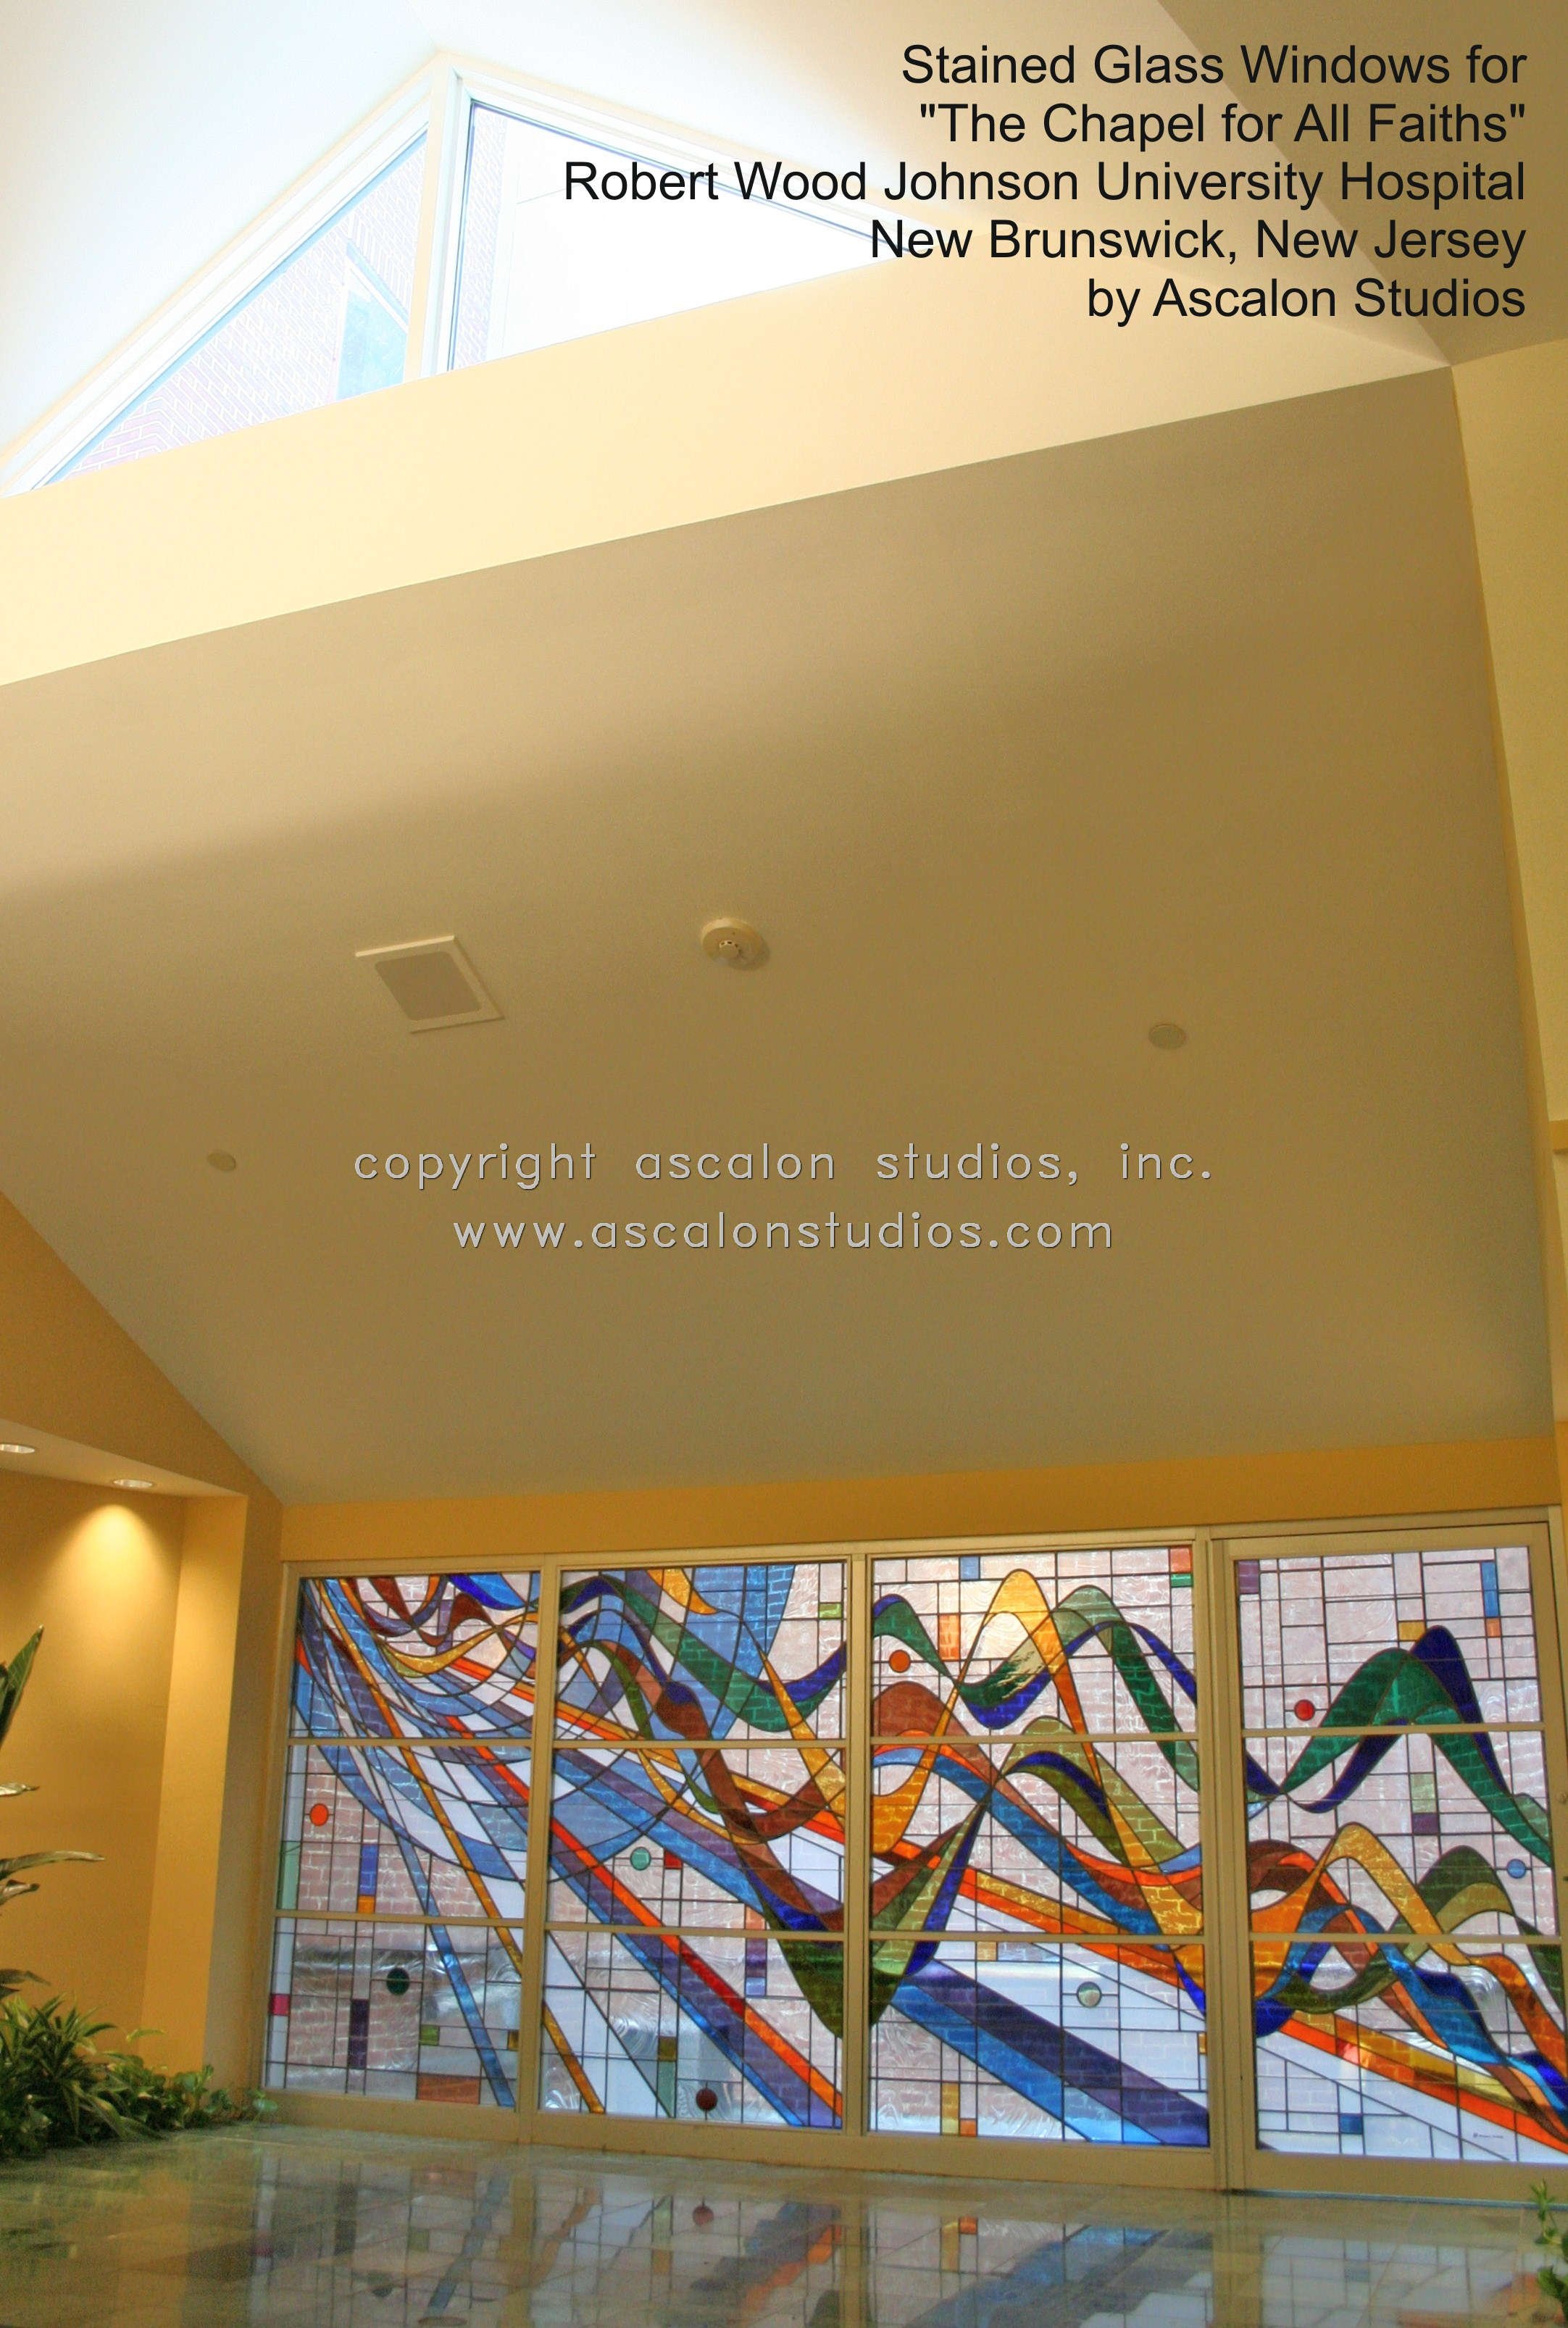 Ascalon Studios, custom stained glass windows and artwork for worship and public spaces